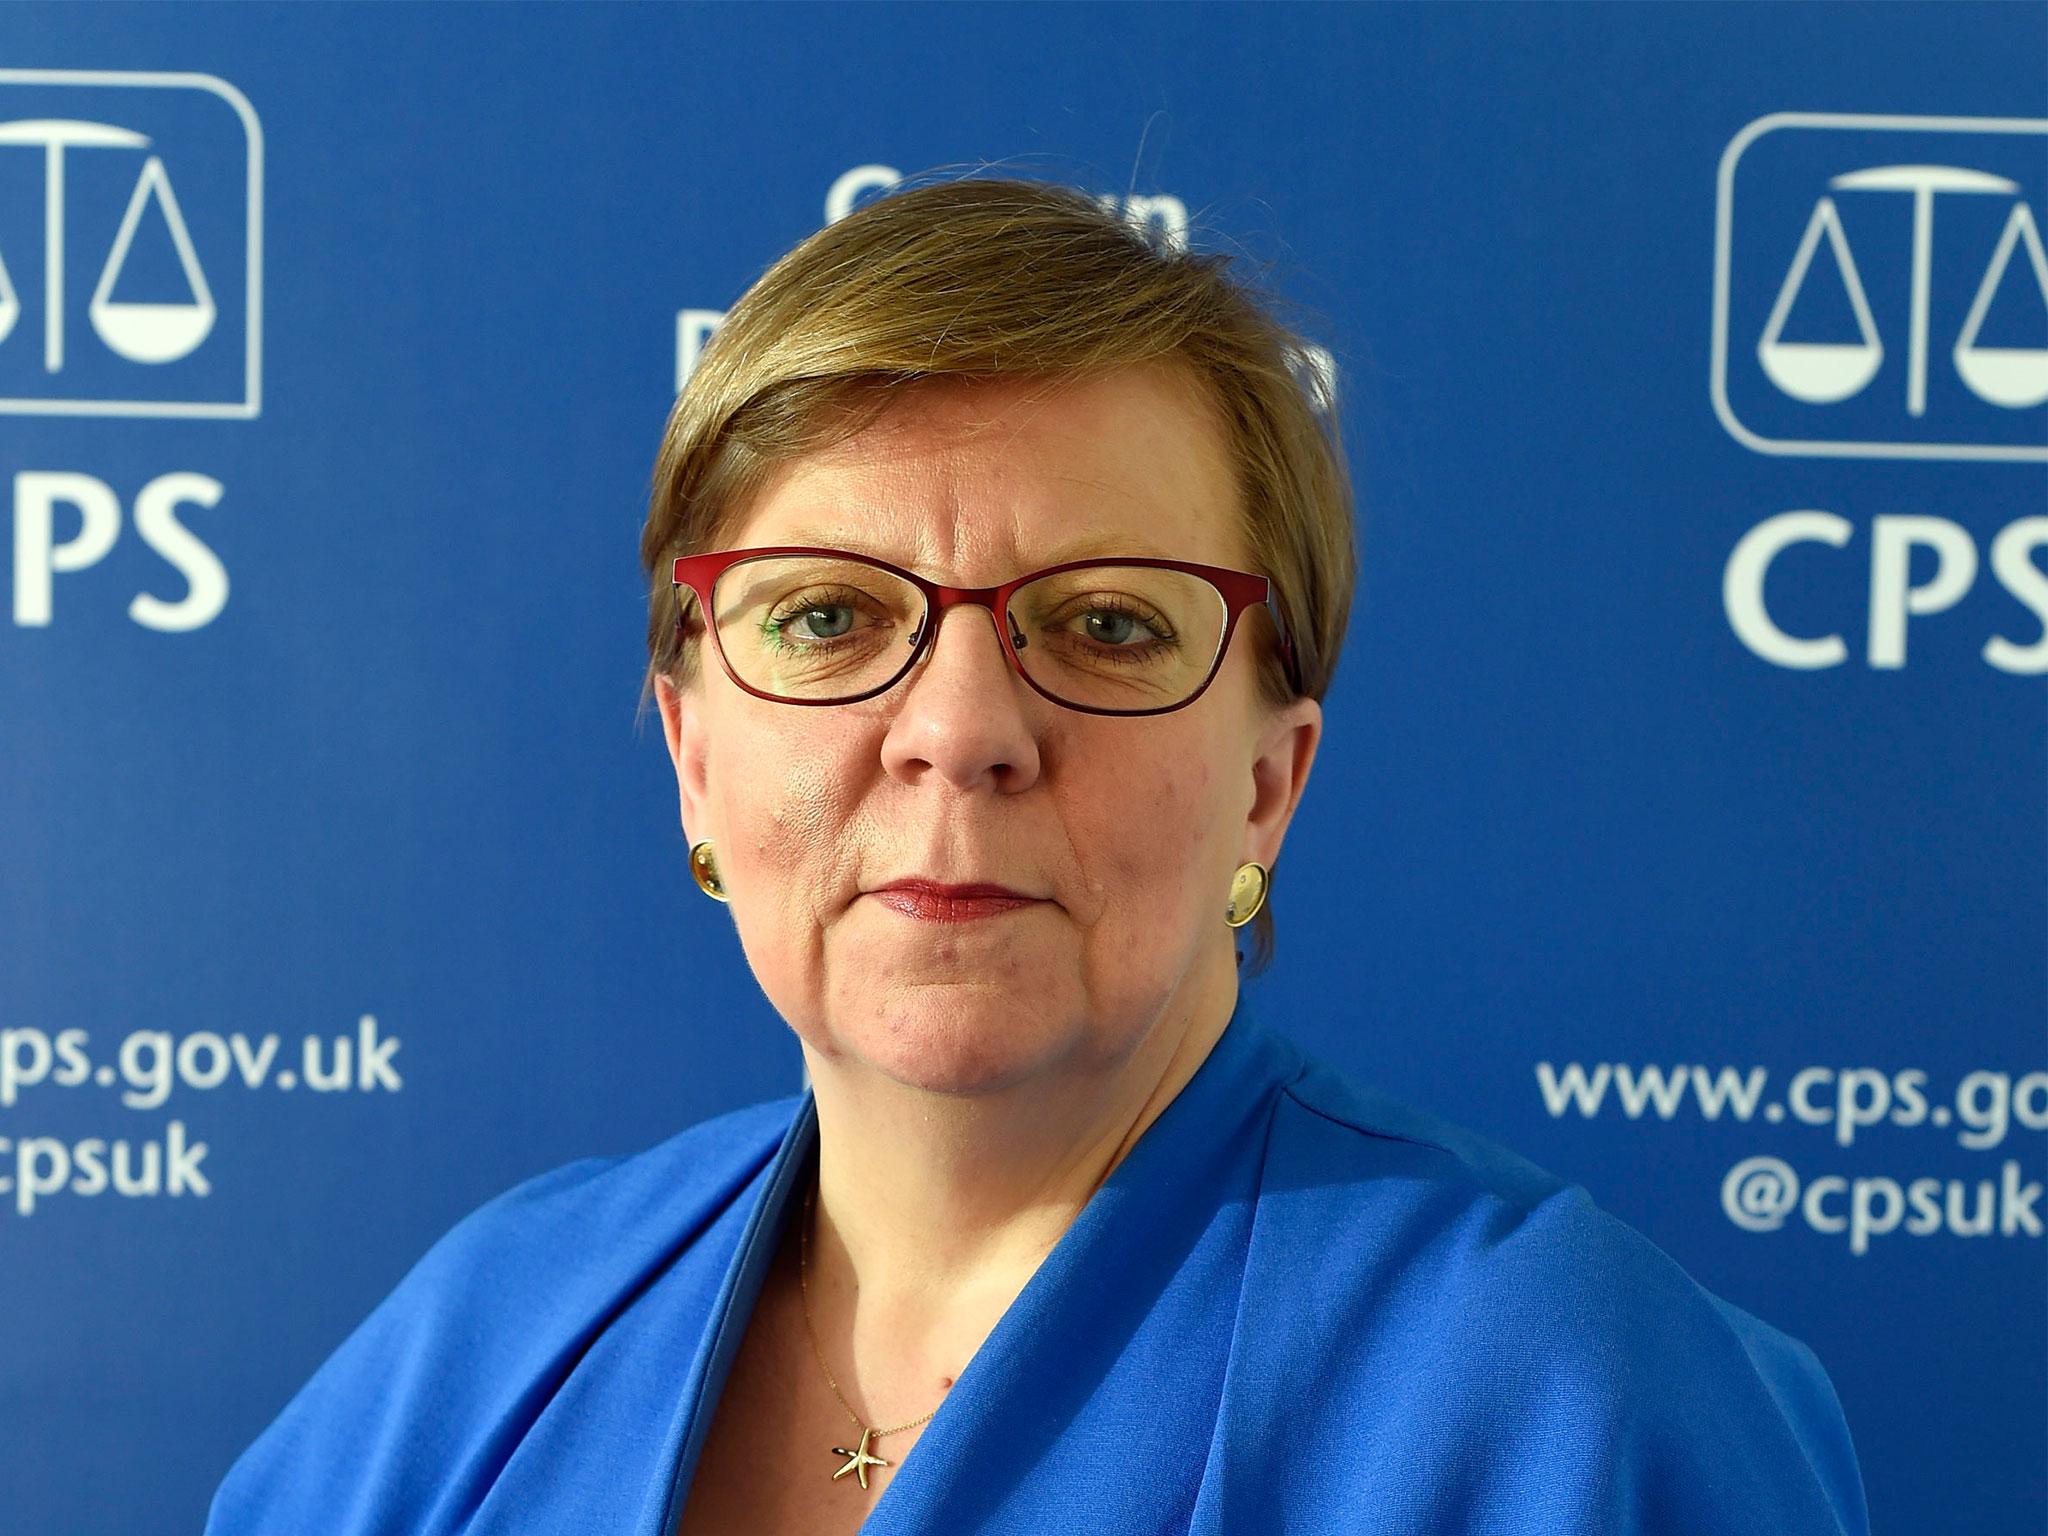 The fine comes near the end of a controversial term headed by Alison Saunders, the outgoing director of public prosecutions